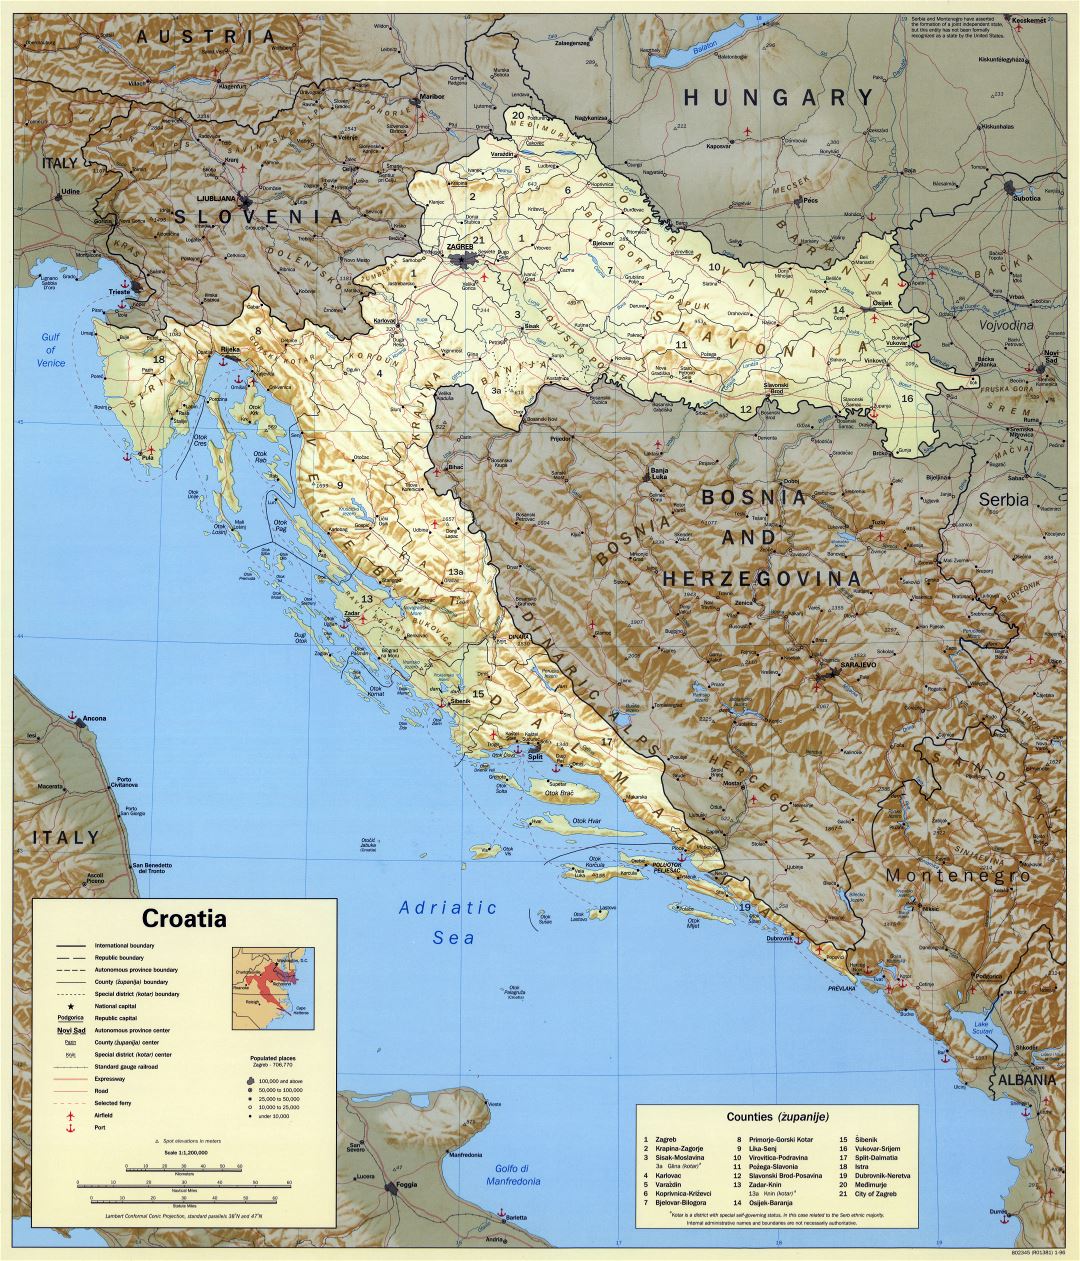 Large scale political and administrative map of Croatia with relief, marks of cities, roads, railroads, airfields and seaports - 1996